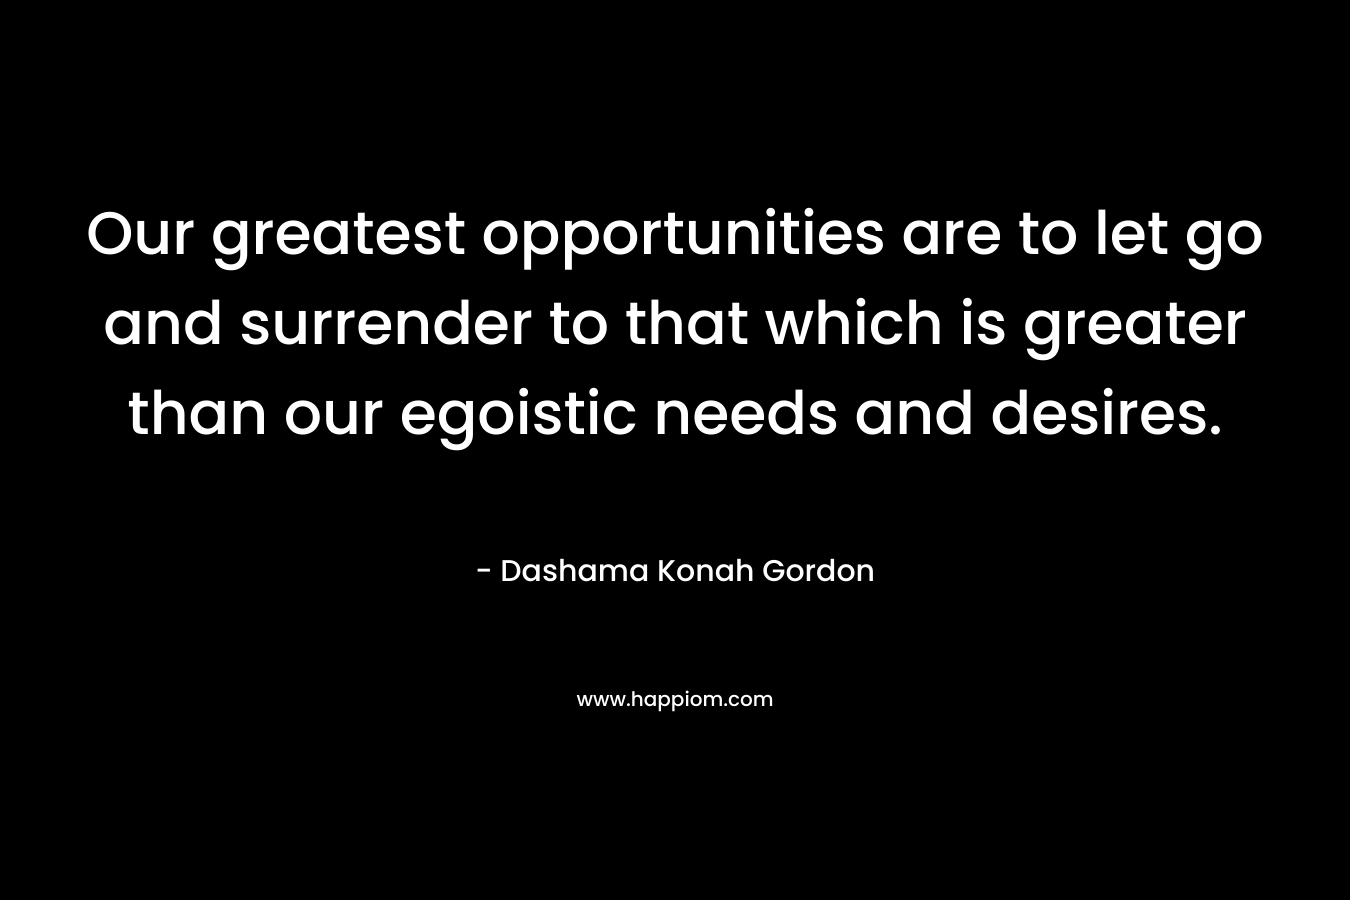 Our greatest opportunities are to let go and surrender to that which is greater than our egoistic needs and desires. – Dashama Konah Gordon